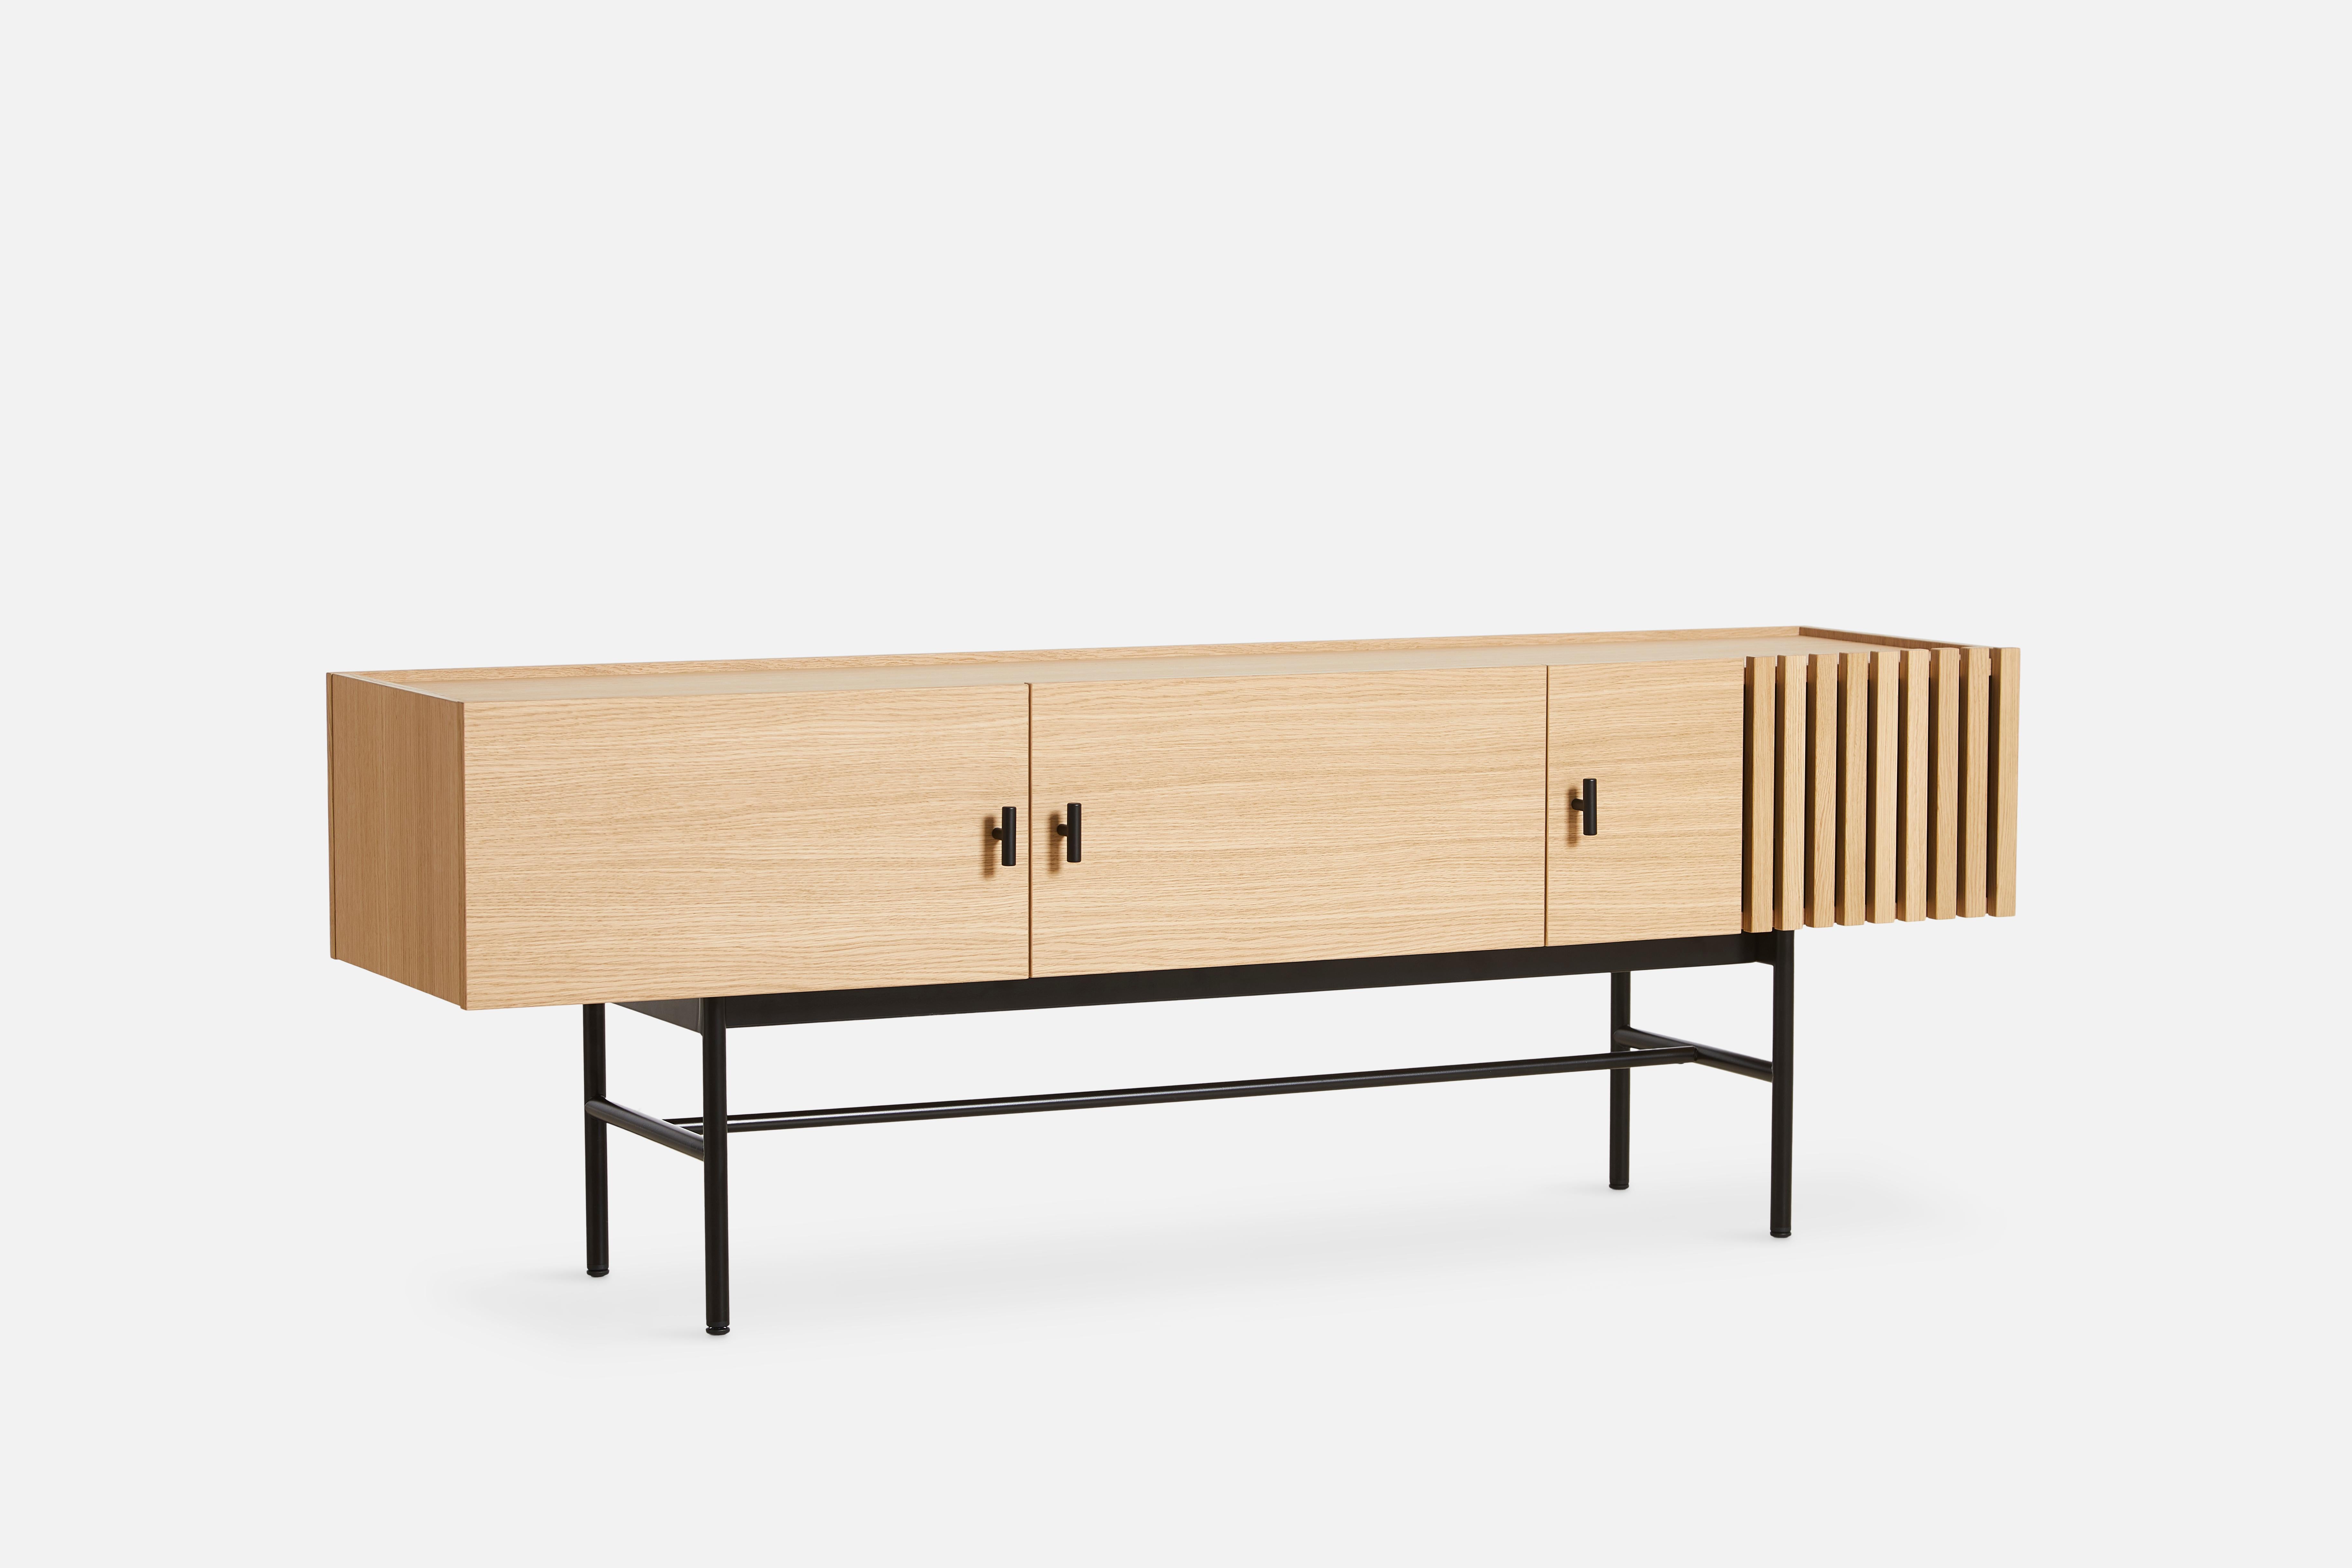 White Oak Array low sideboard 150 by Says Who
Materials: Oak, Metal
Dimensions: D 37 x W 150 x H 53 cm
Also available in different colors and materials. 

The founders, Mia and Torben Koed, decided to put their 30 years of experience into a new